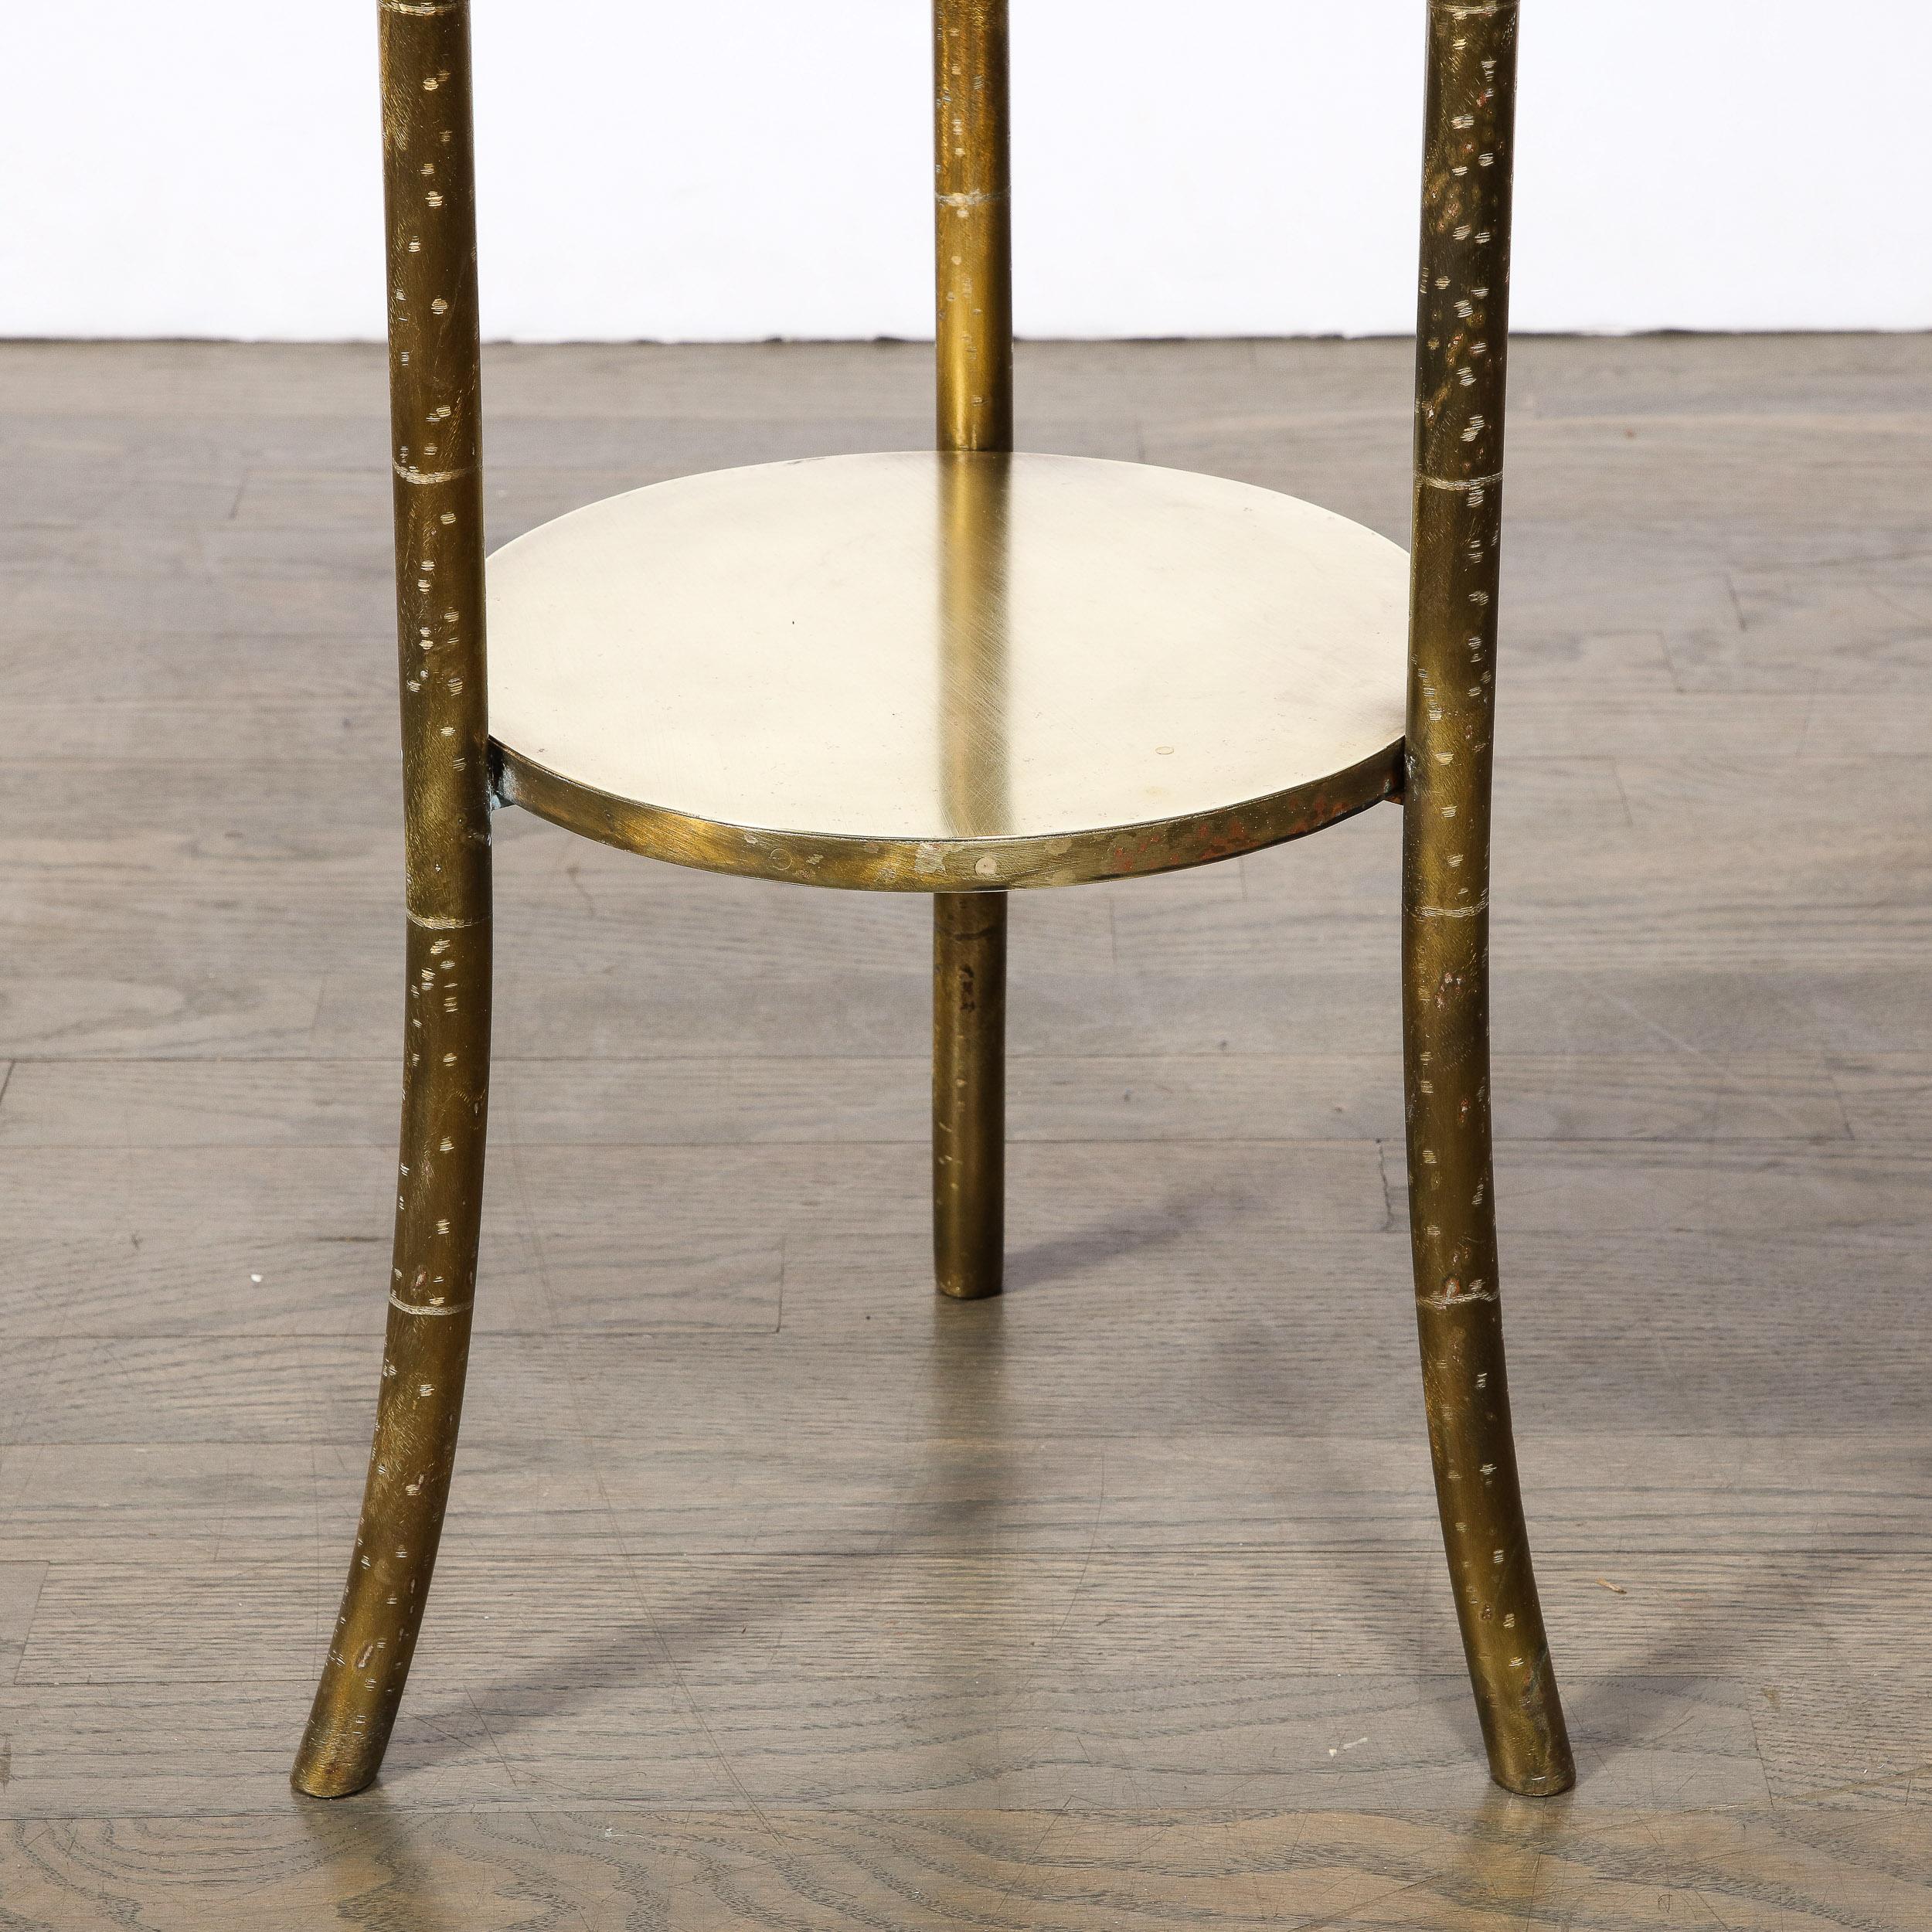 American Mid-Century Modernist Patinated Bronze & Hand-Etched End Table, Philip Laverne